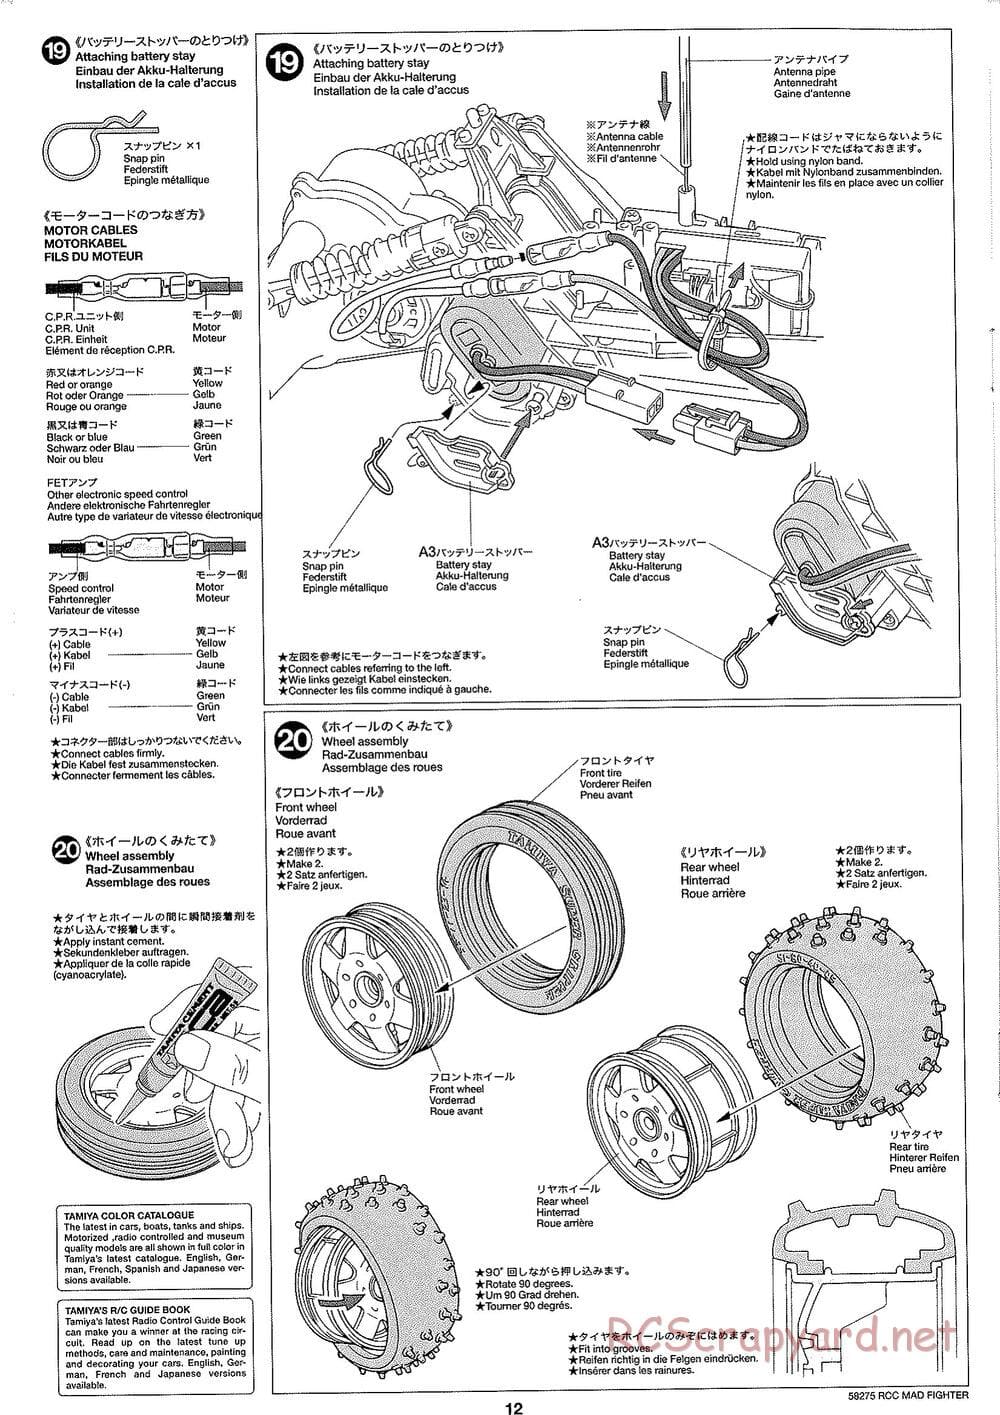 Tamiya - Mad Fighter Chassis - Manual - Page 12